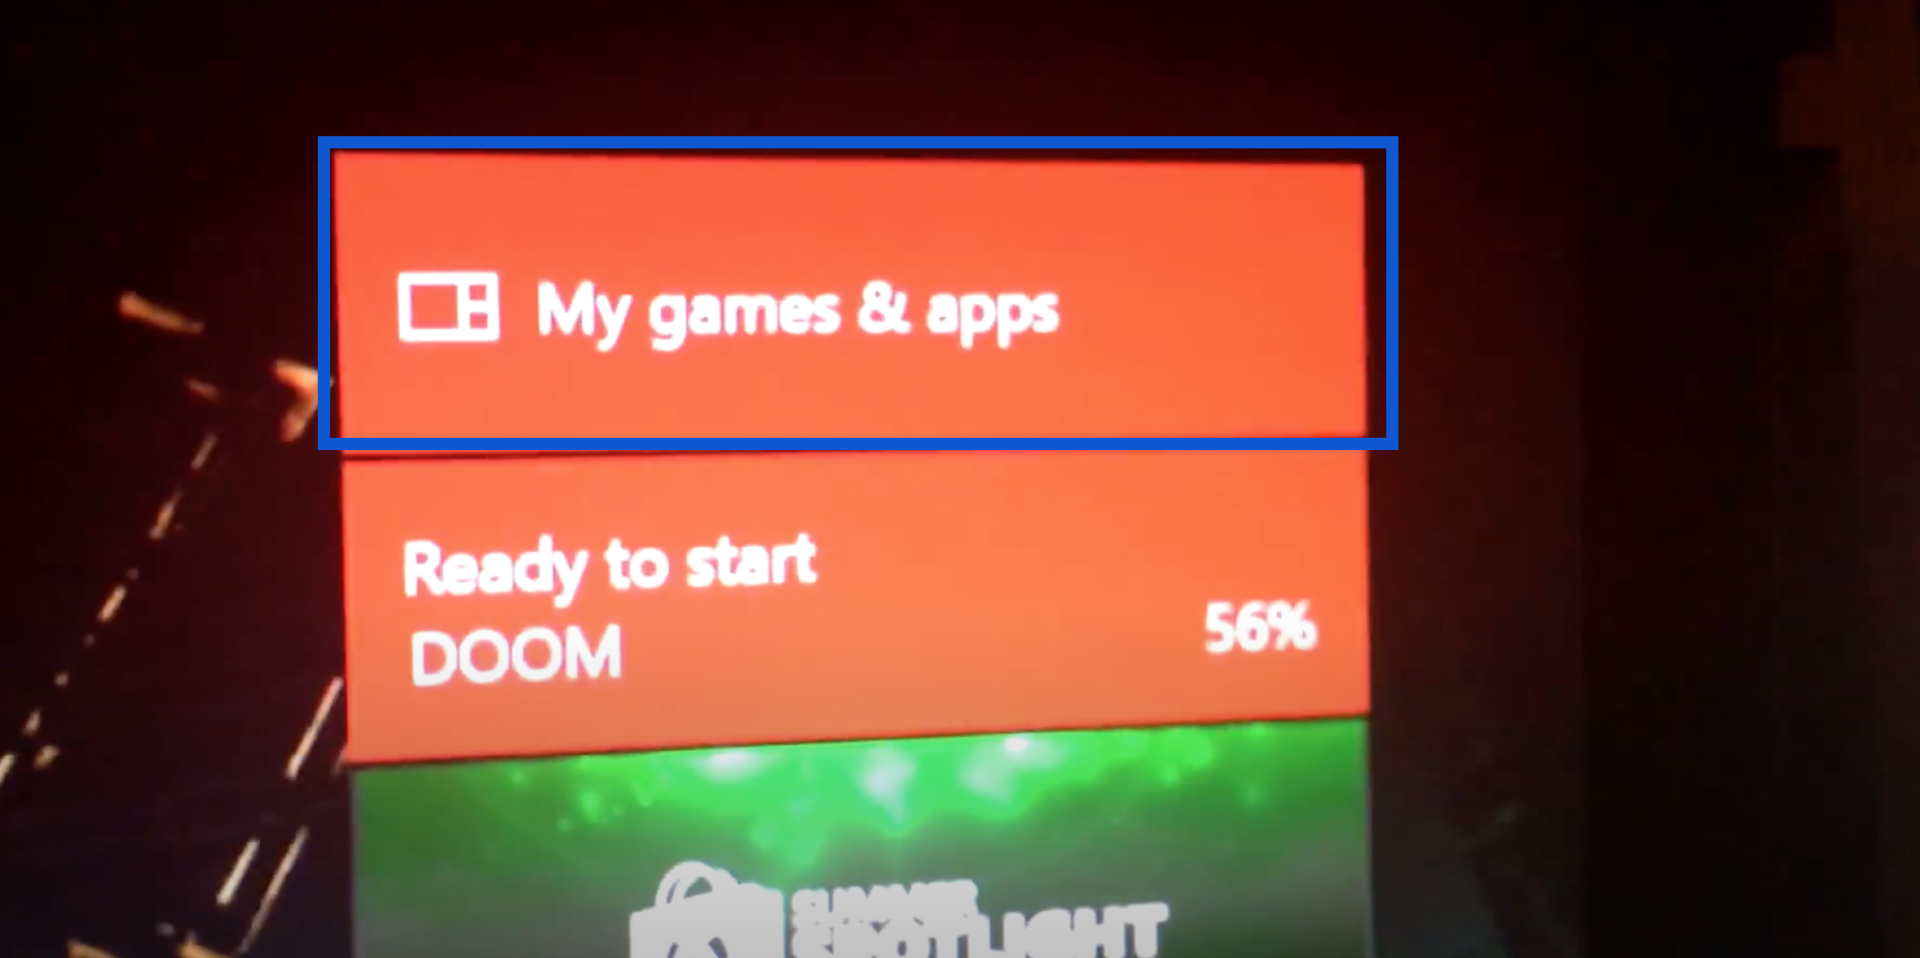 My games & apps in Xbox